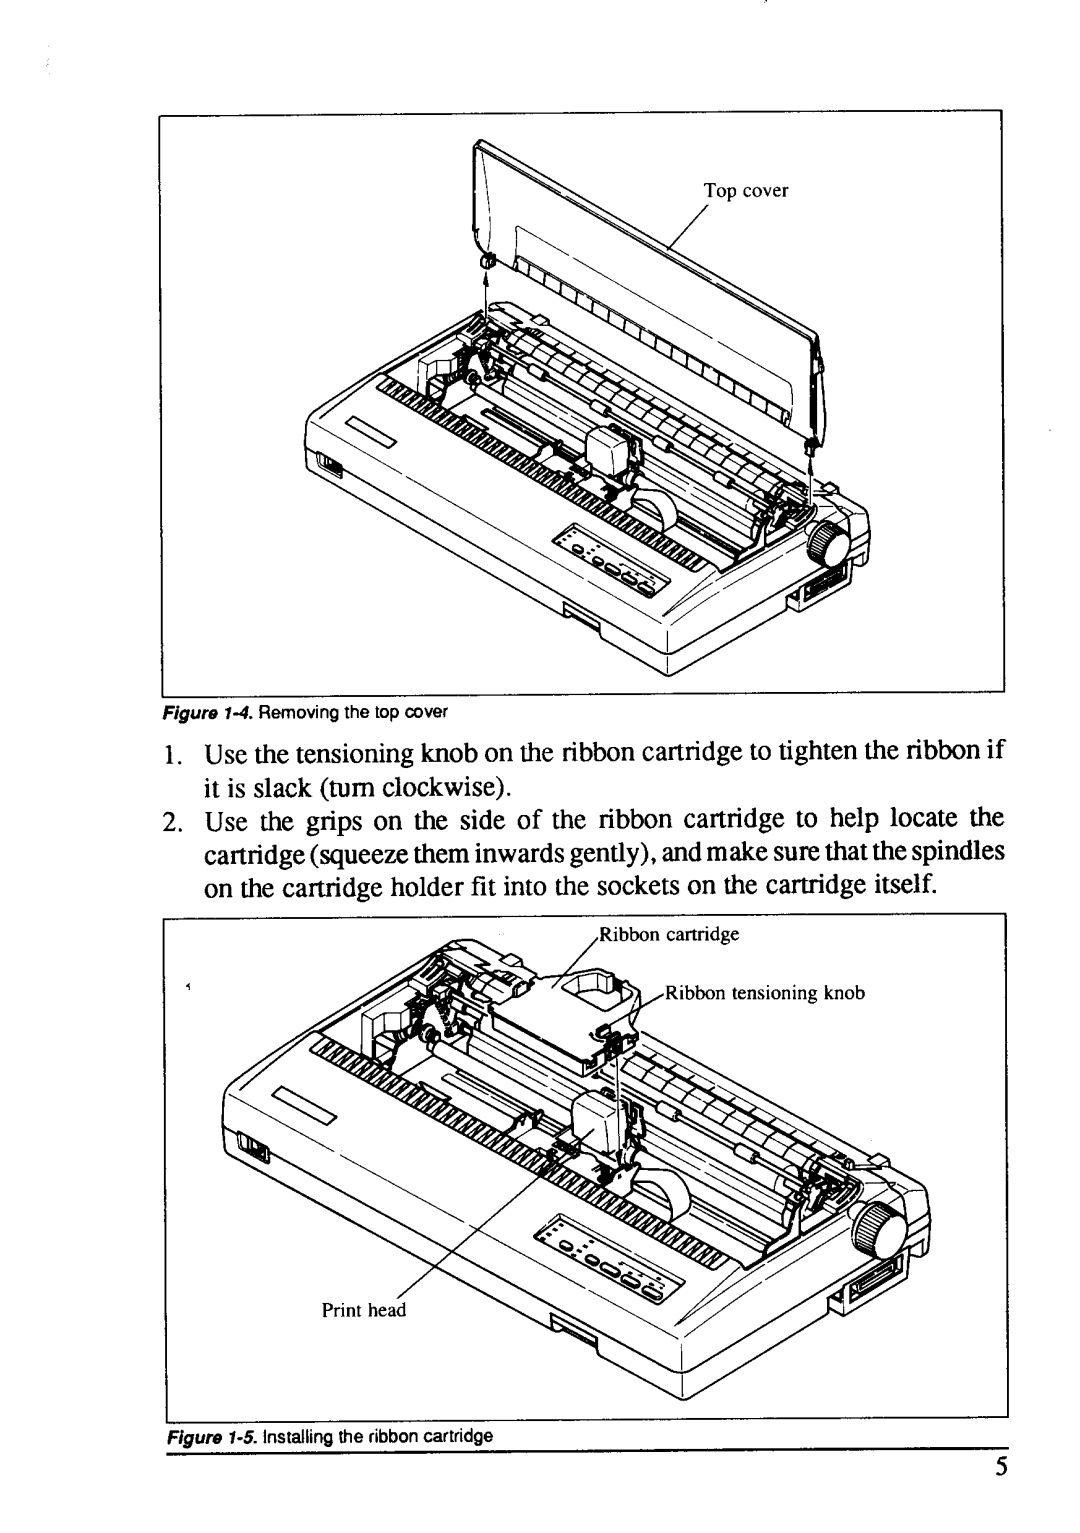 Star Micronics LC24-15 user manual Figure T-4. Removing the top cover, 5. Installing the ribbon cartrldge 